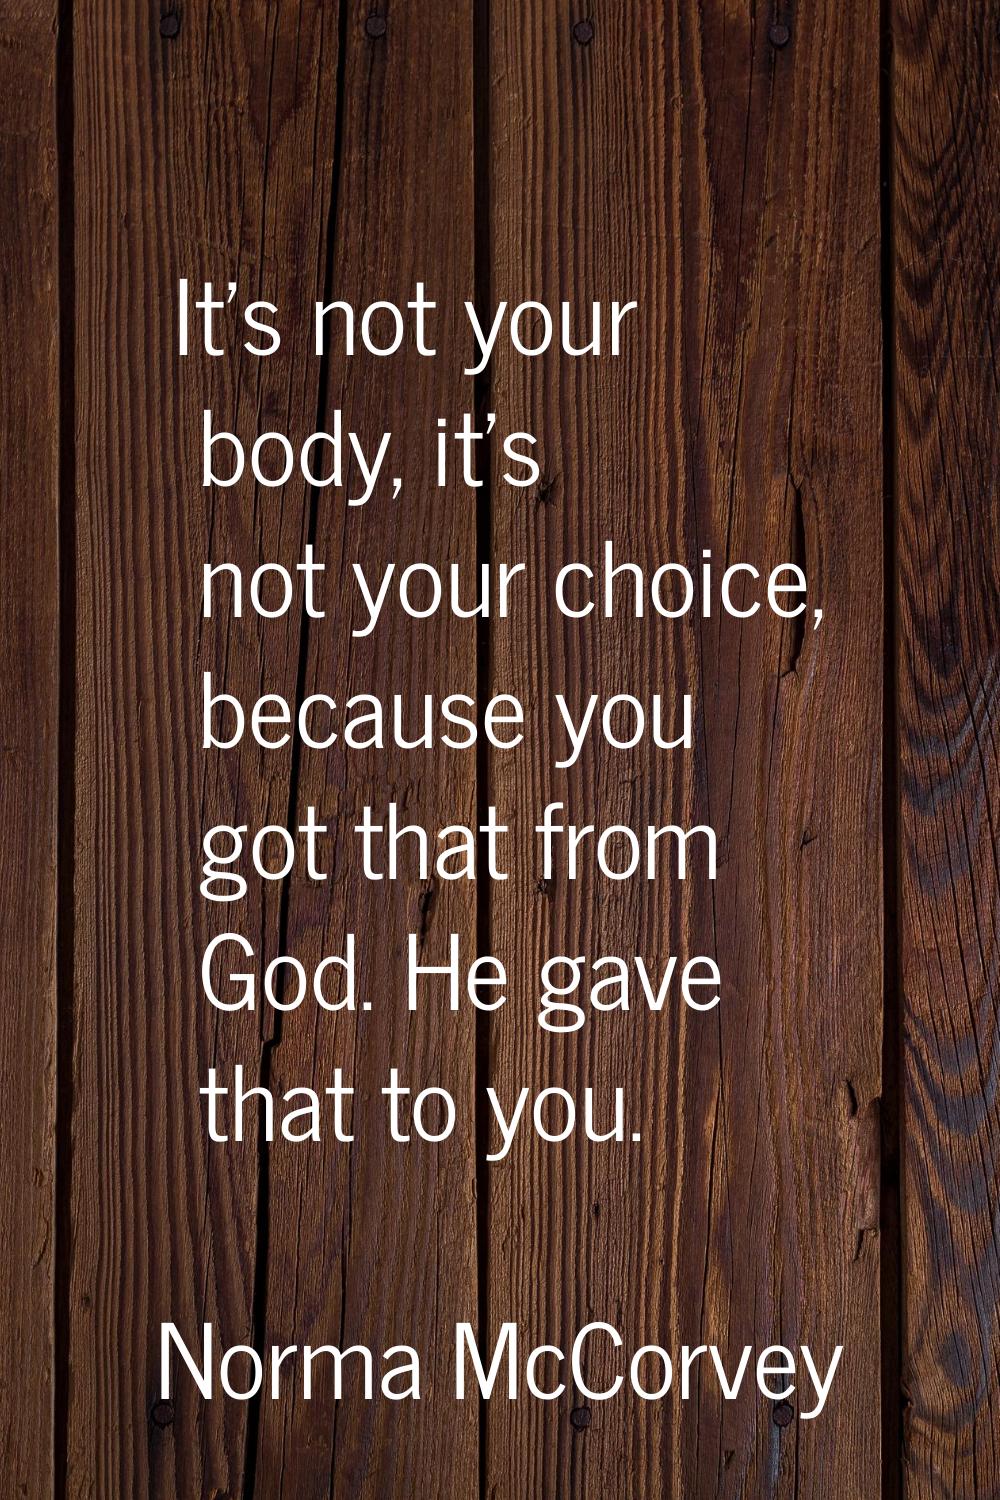 It's not your body, it's not your choice, because you got that from God. He gave that to you.